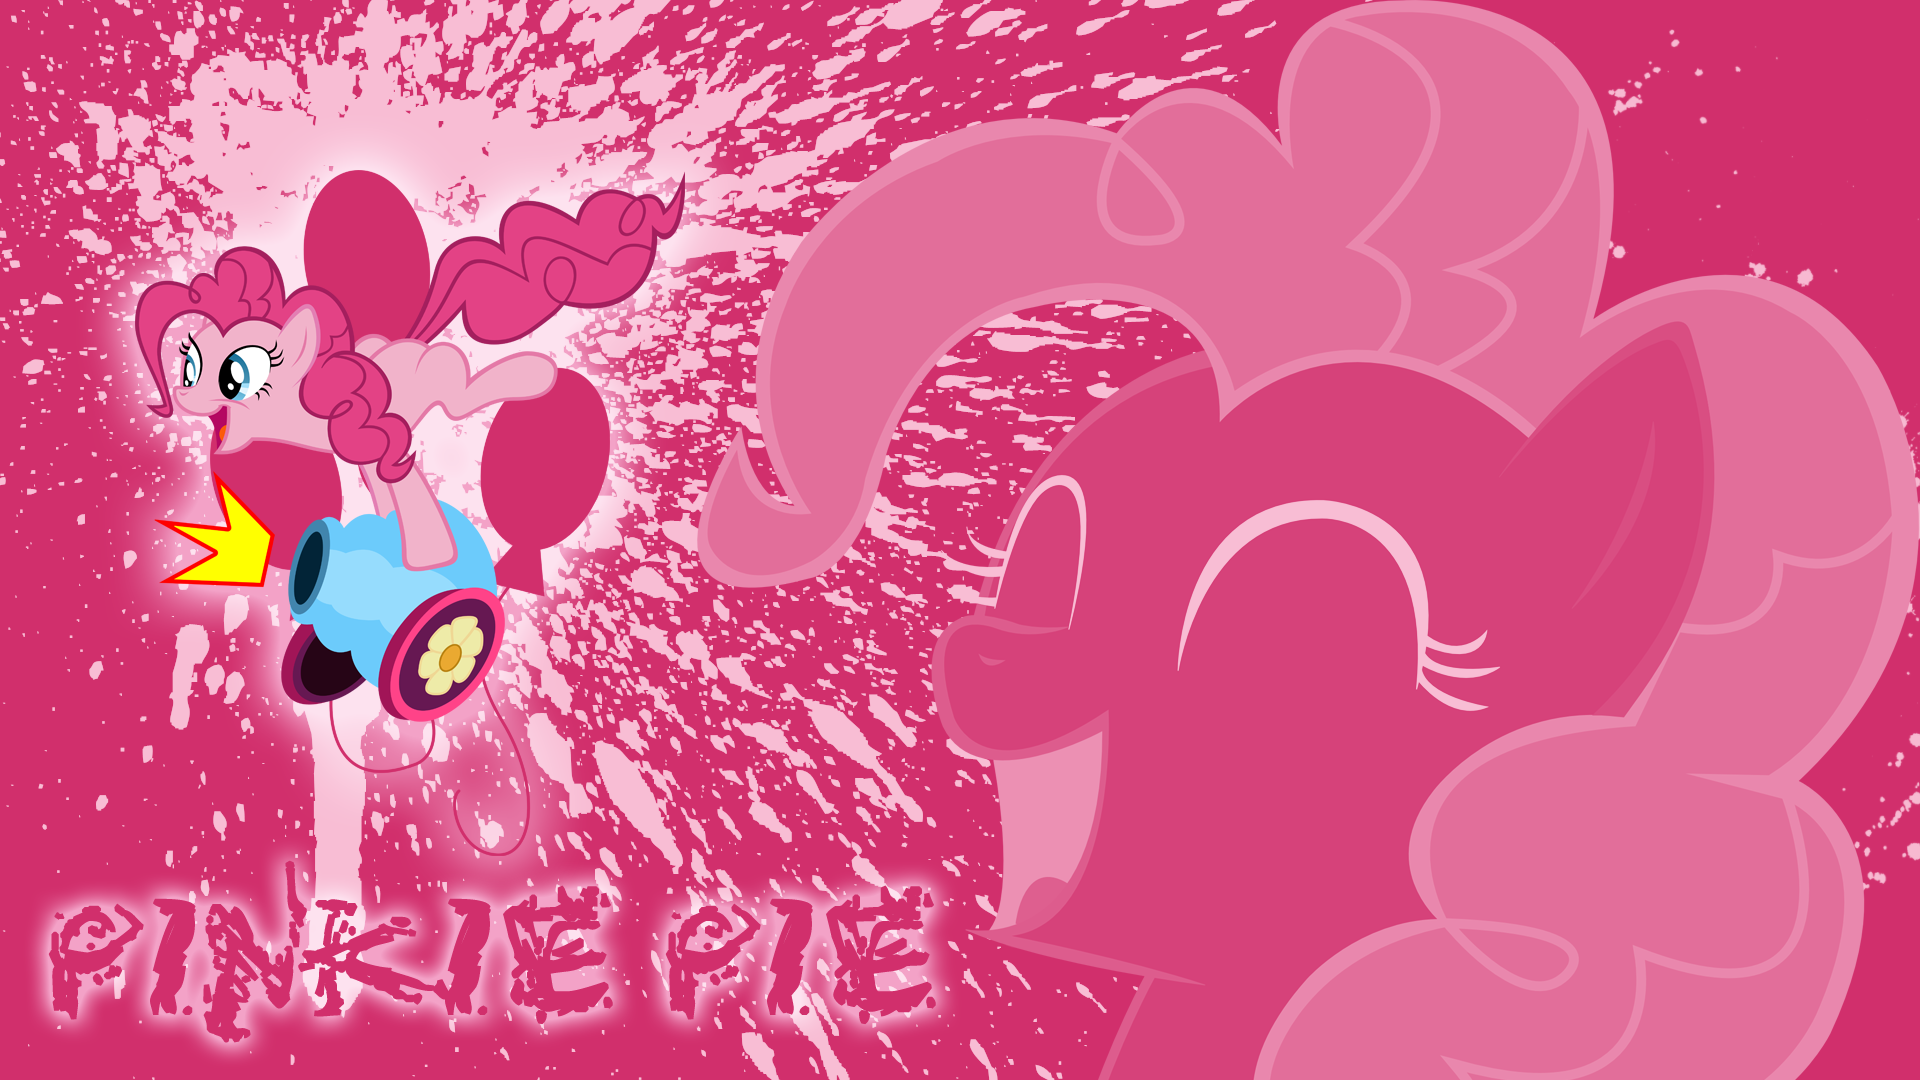 The Party has Boomed! - Pinkie Pie Wallpaper by cradet